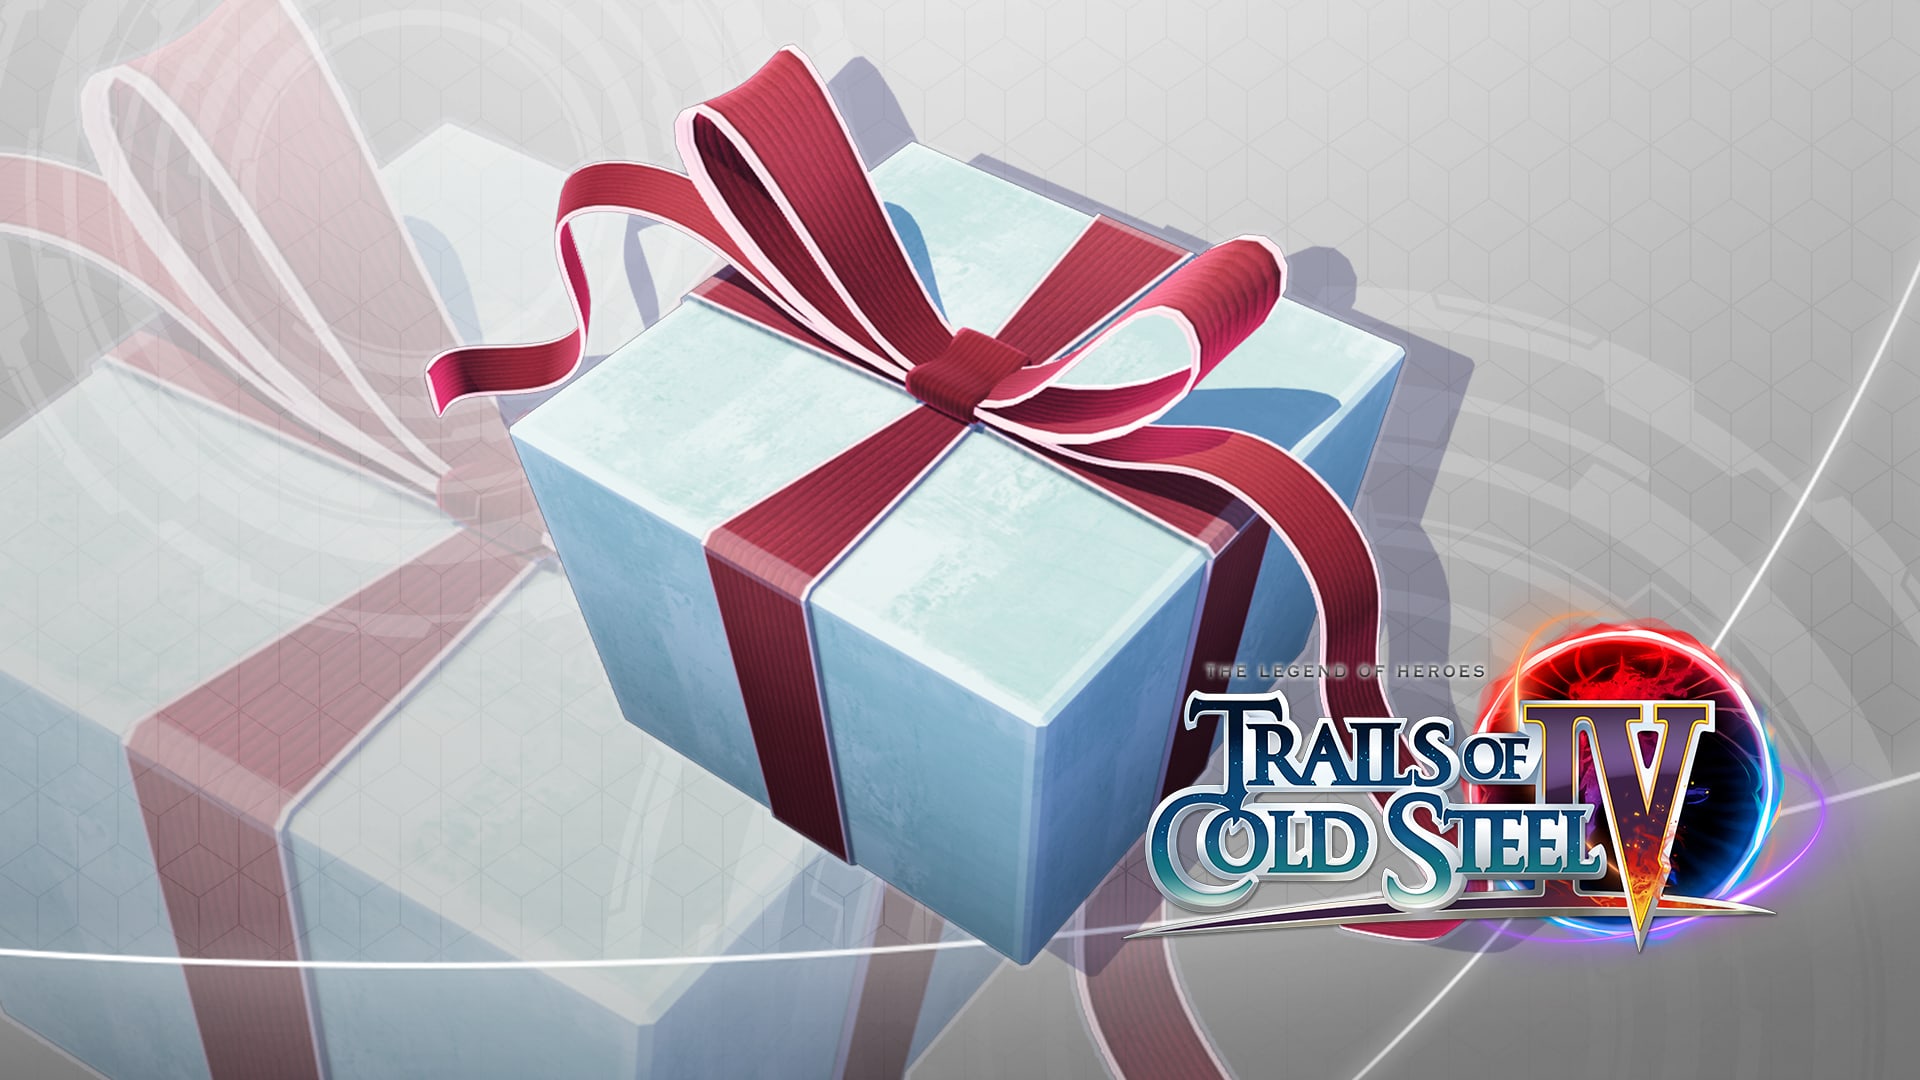 Trails of Cold Steel IV: Useful Accessories Set